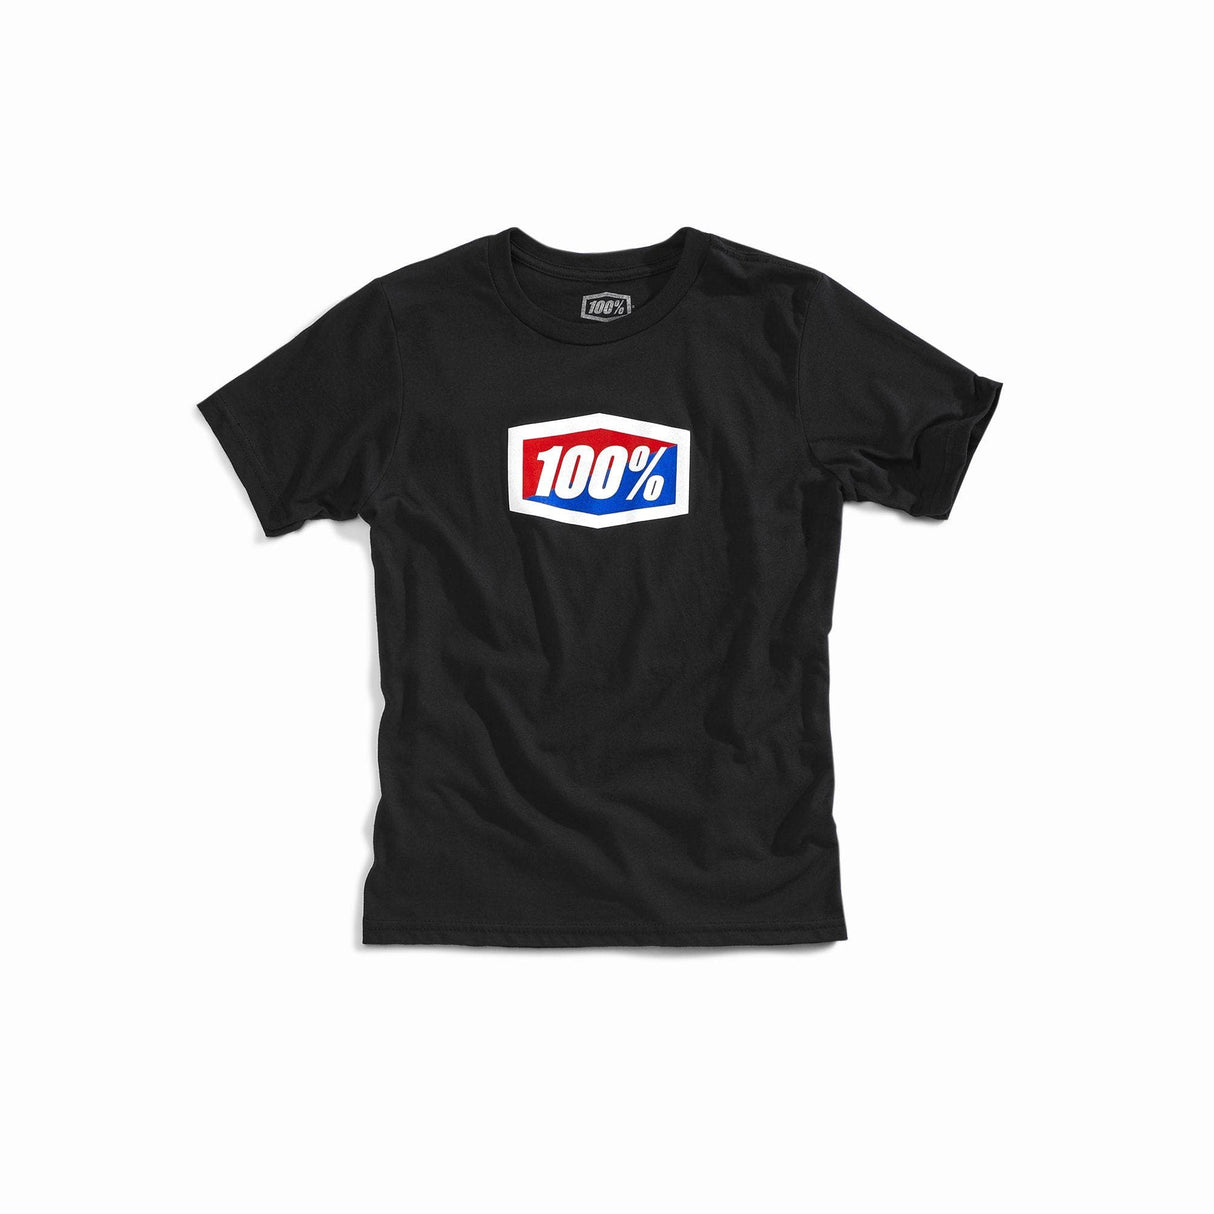 100% Official Youth T-Shirt Black M